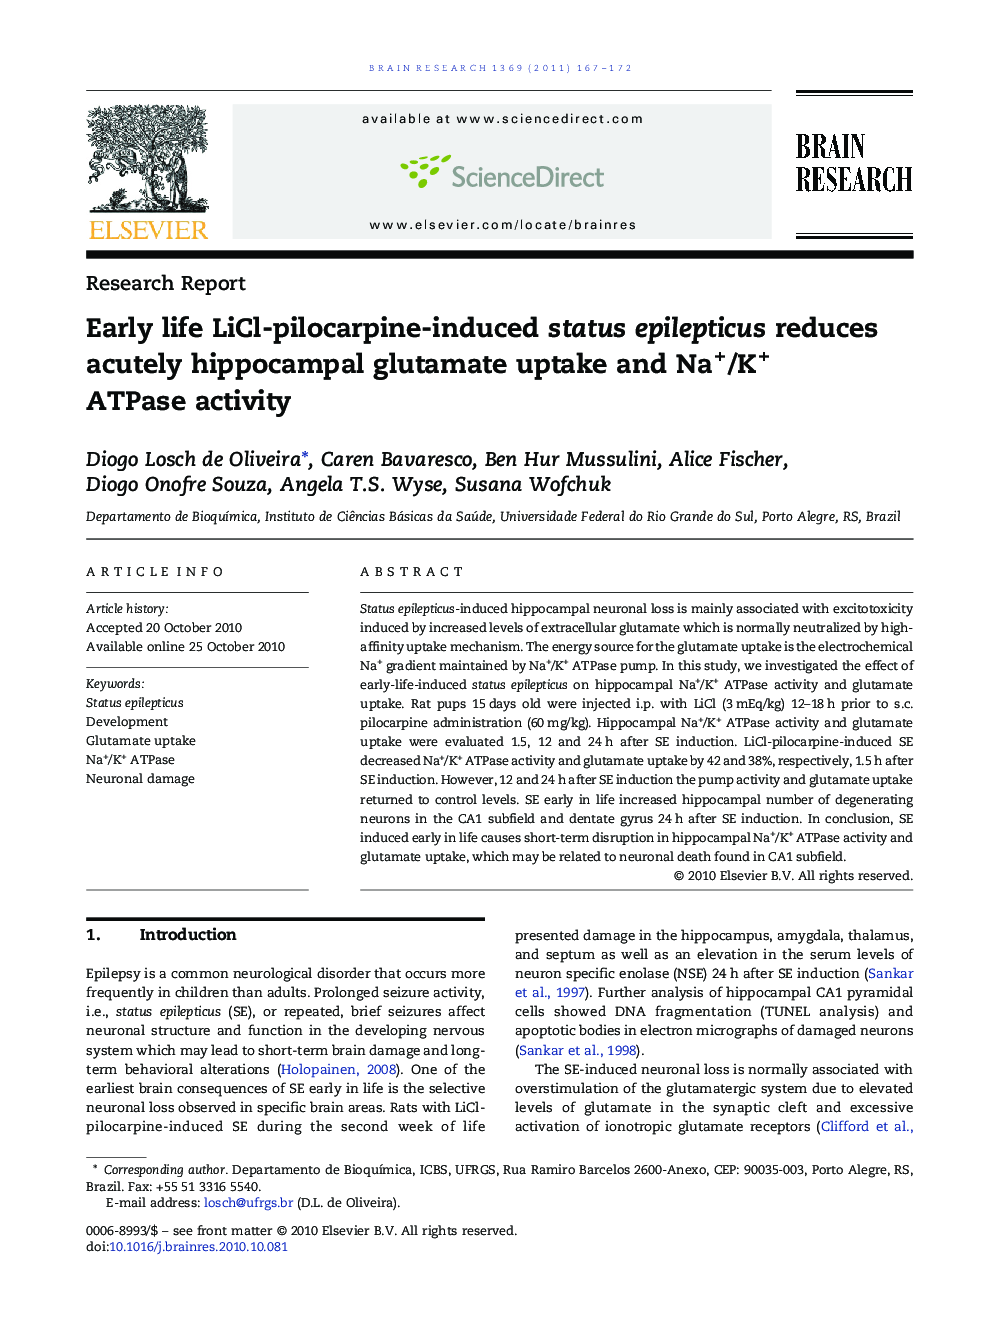 Research ReportEarly life LiCl-pilocarpine-induced status epilepticus reduces acutely hippocampal glutamate uptake and Na+/K+ ATPase activity